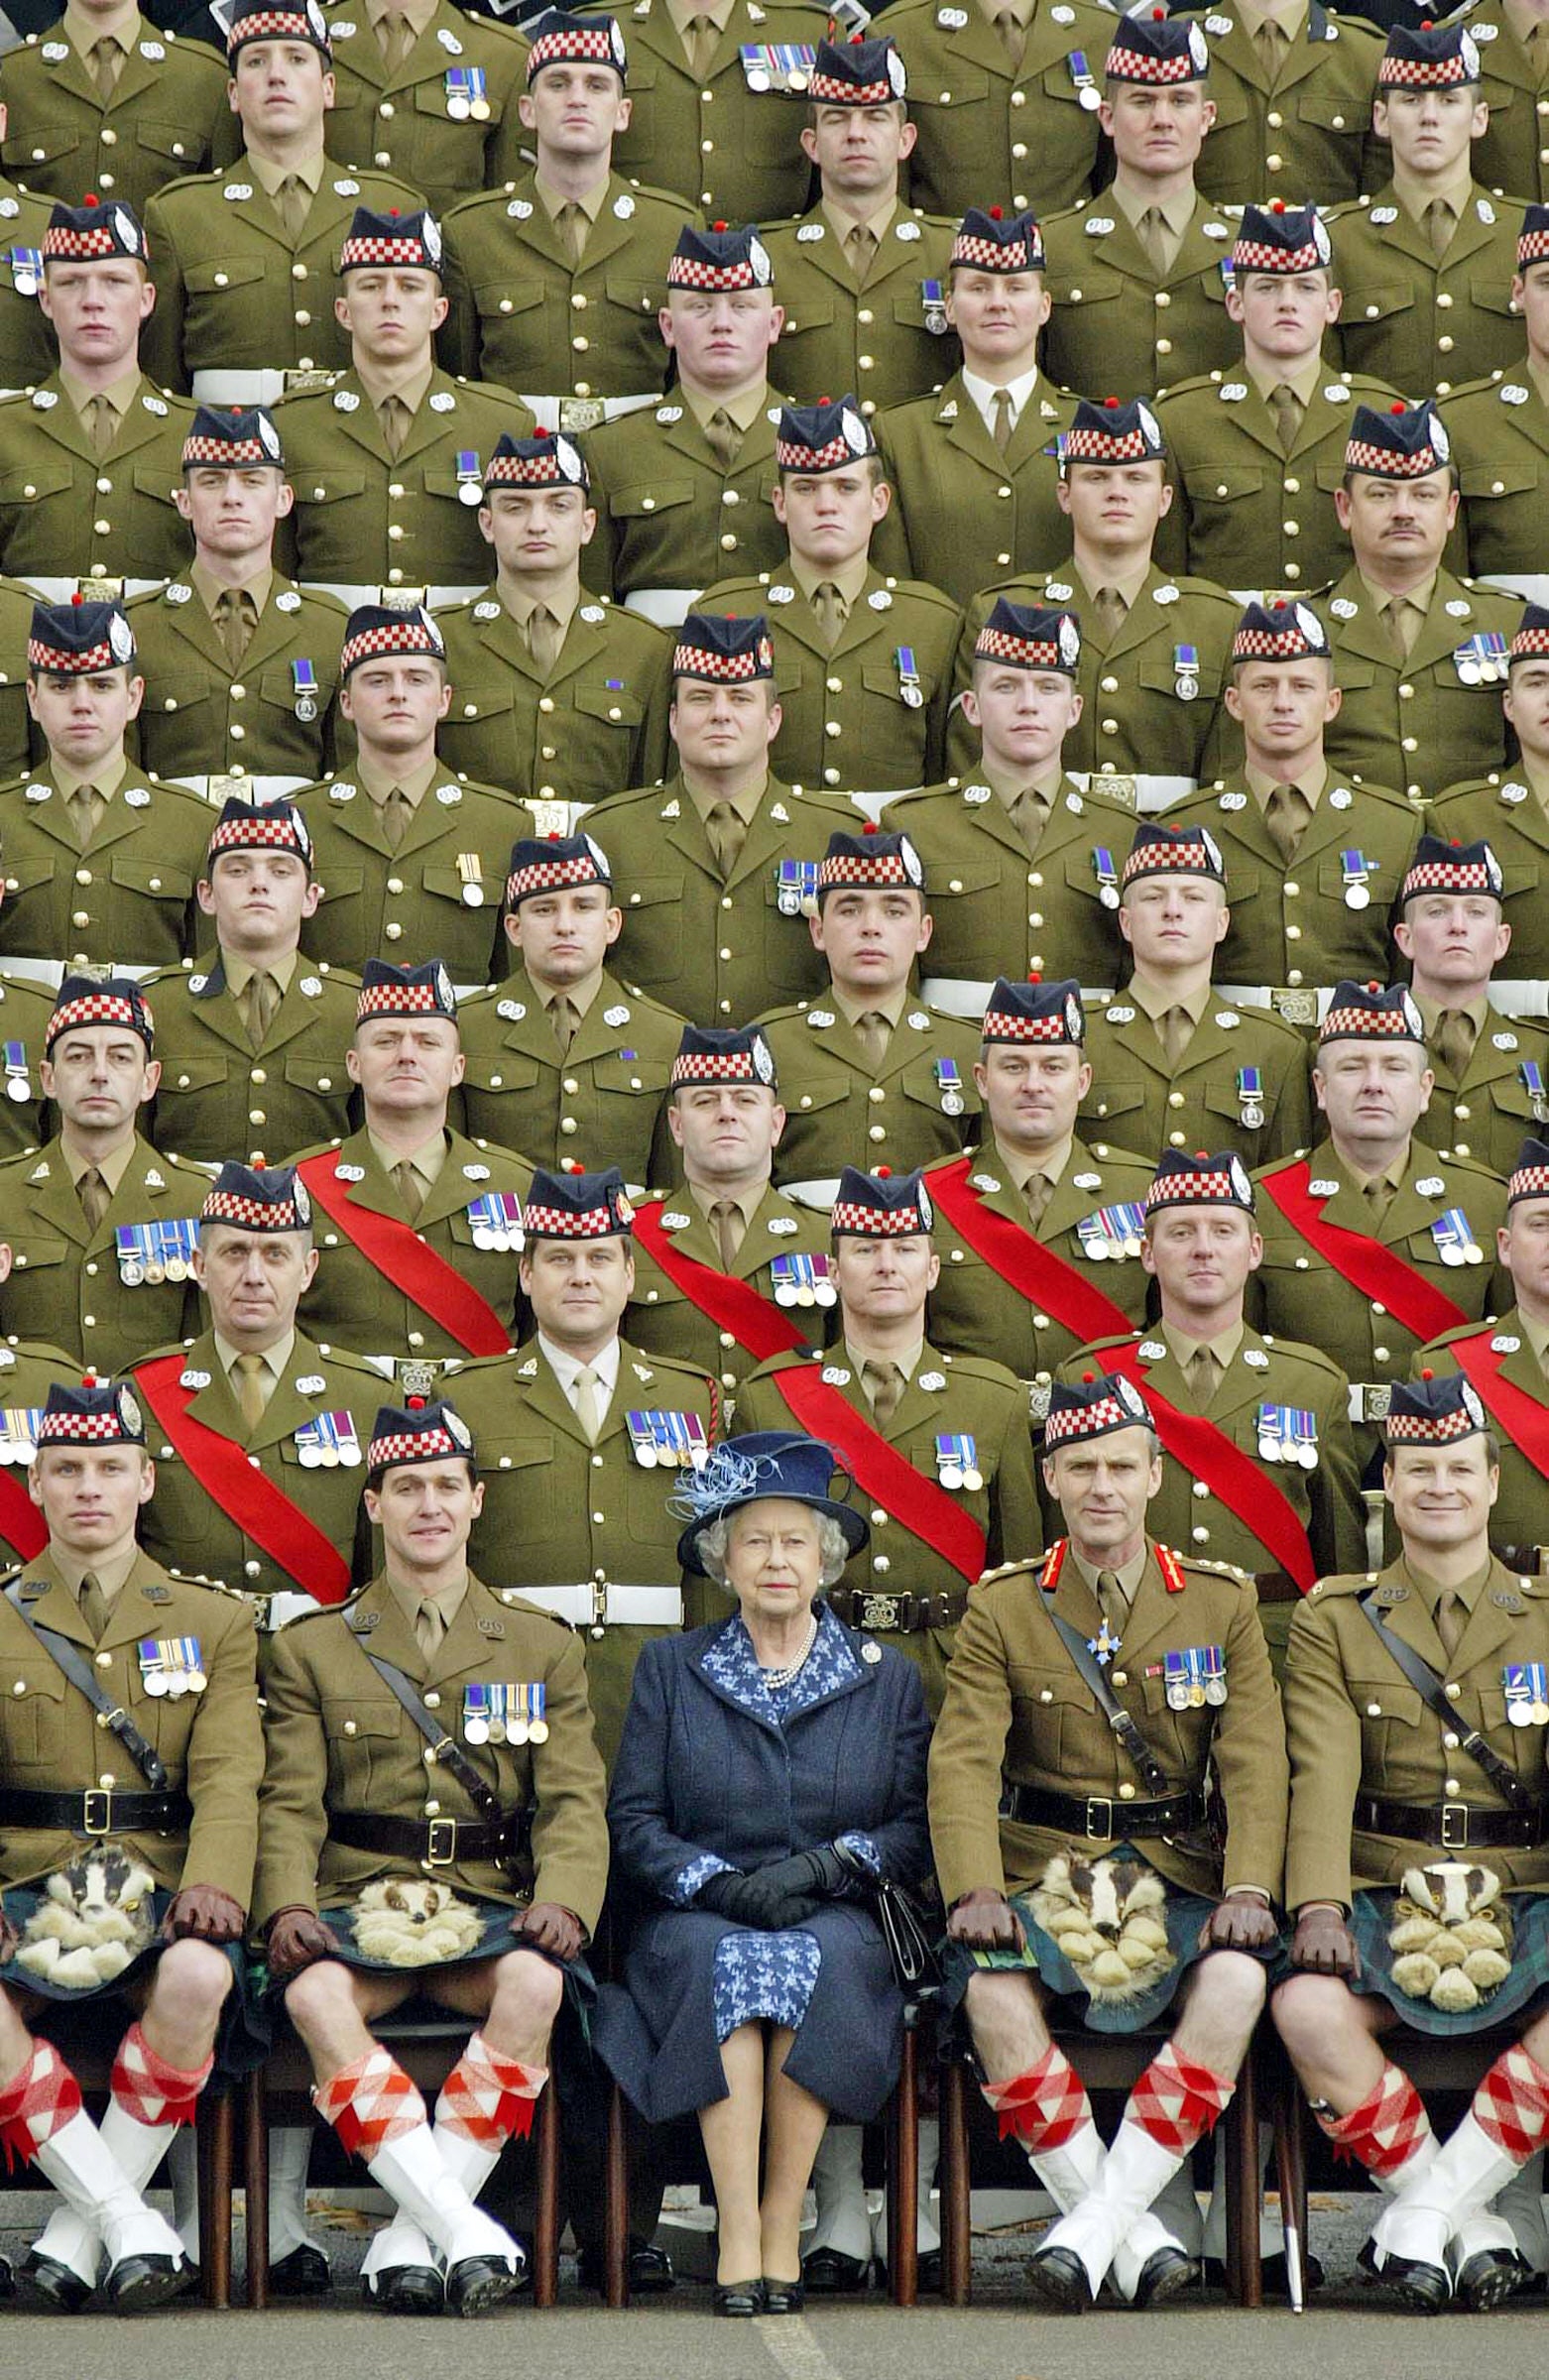 Queen Elizabeth II poses for a picture with members of the 1st Battalion of the Argyll and Sutherland Highlanders at Howe Barracks in Canterbury, 2004